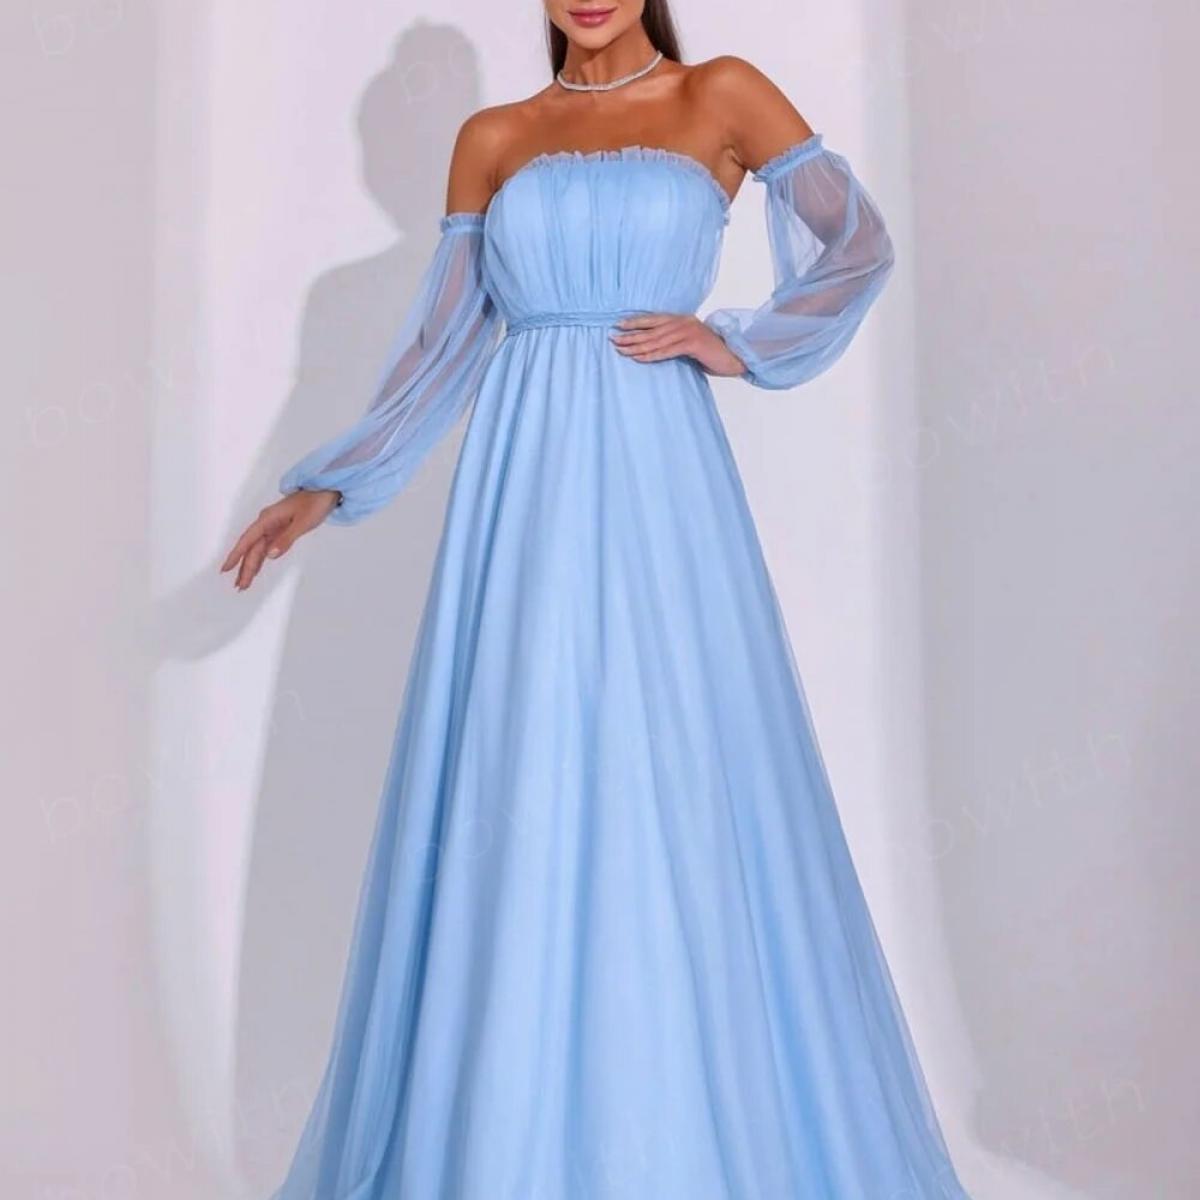 Bowith Party Dresses Women With Detachable Sleeves Strapless Evening Gown Long Elegant Evening Dress Party Vestido De No